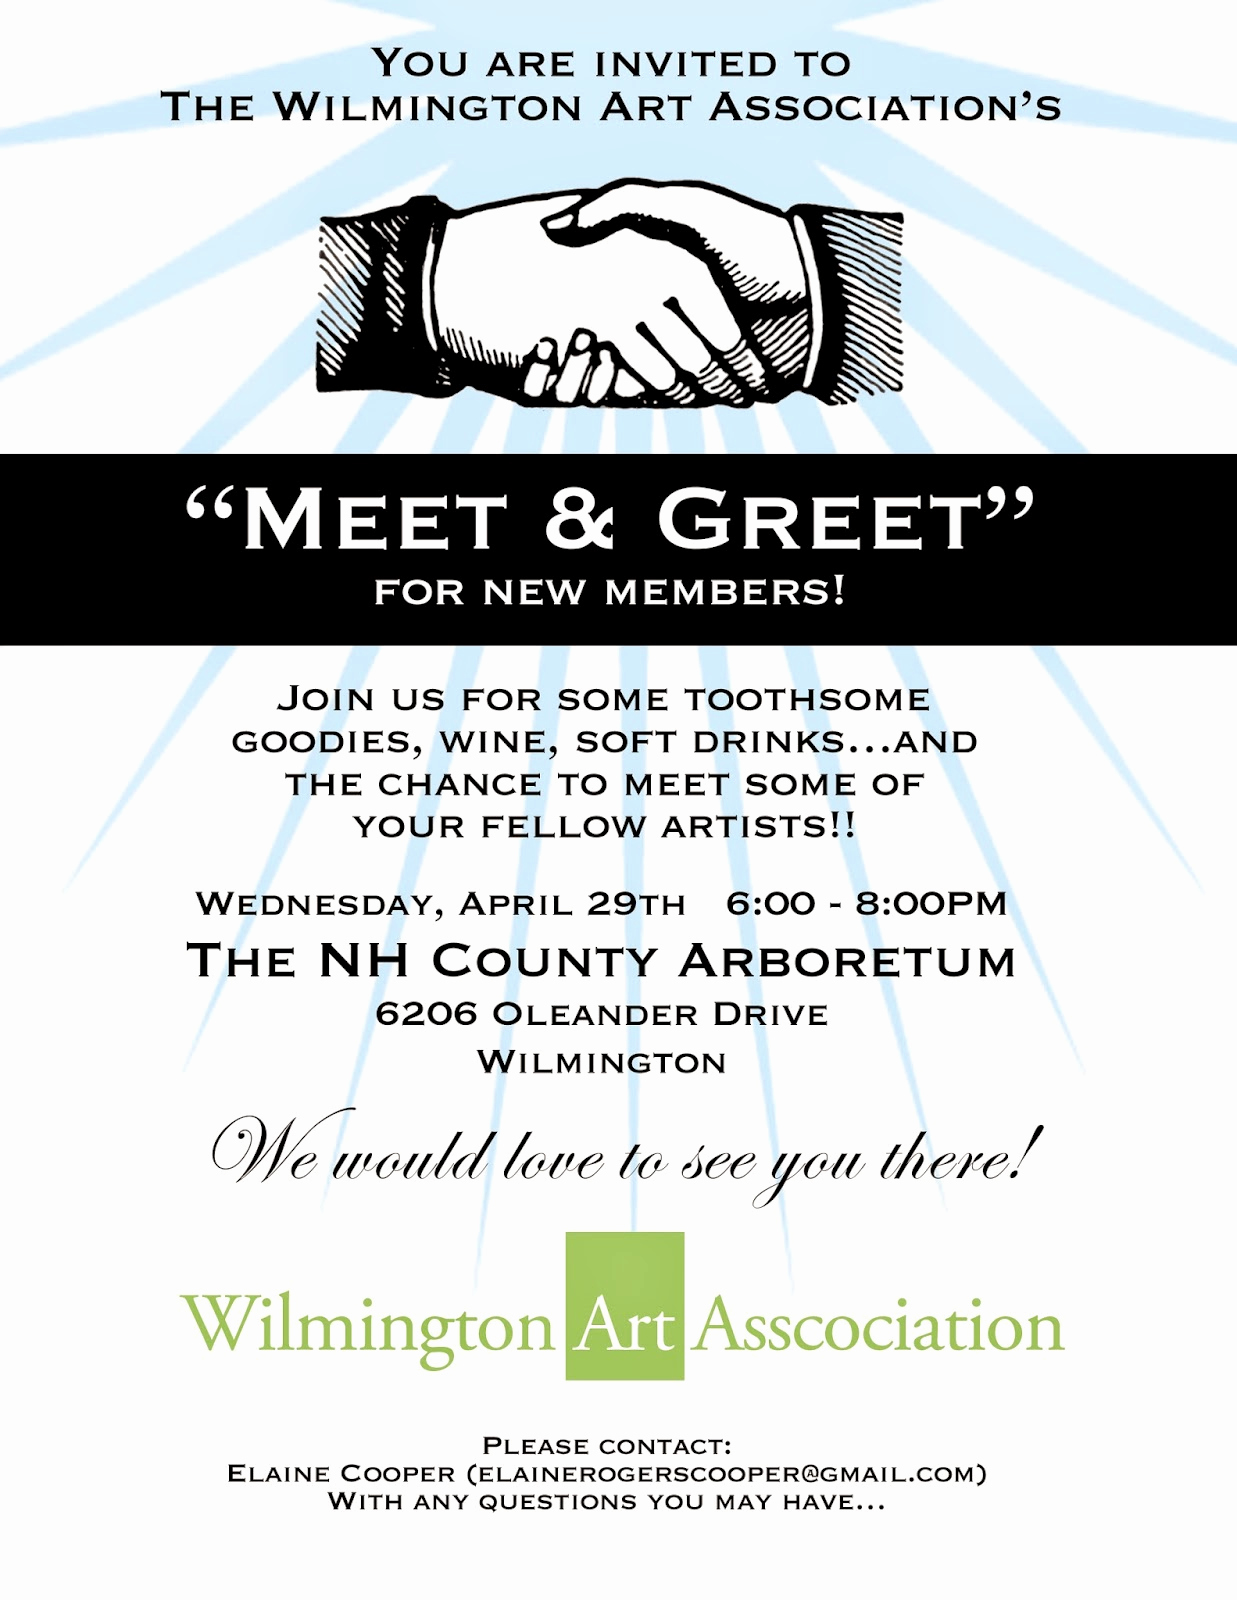 Meet and Greet Invitation Lovely Wilmington Art association Eblast Meet and Greet Invitation